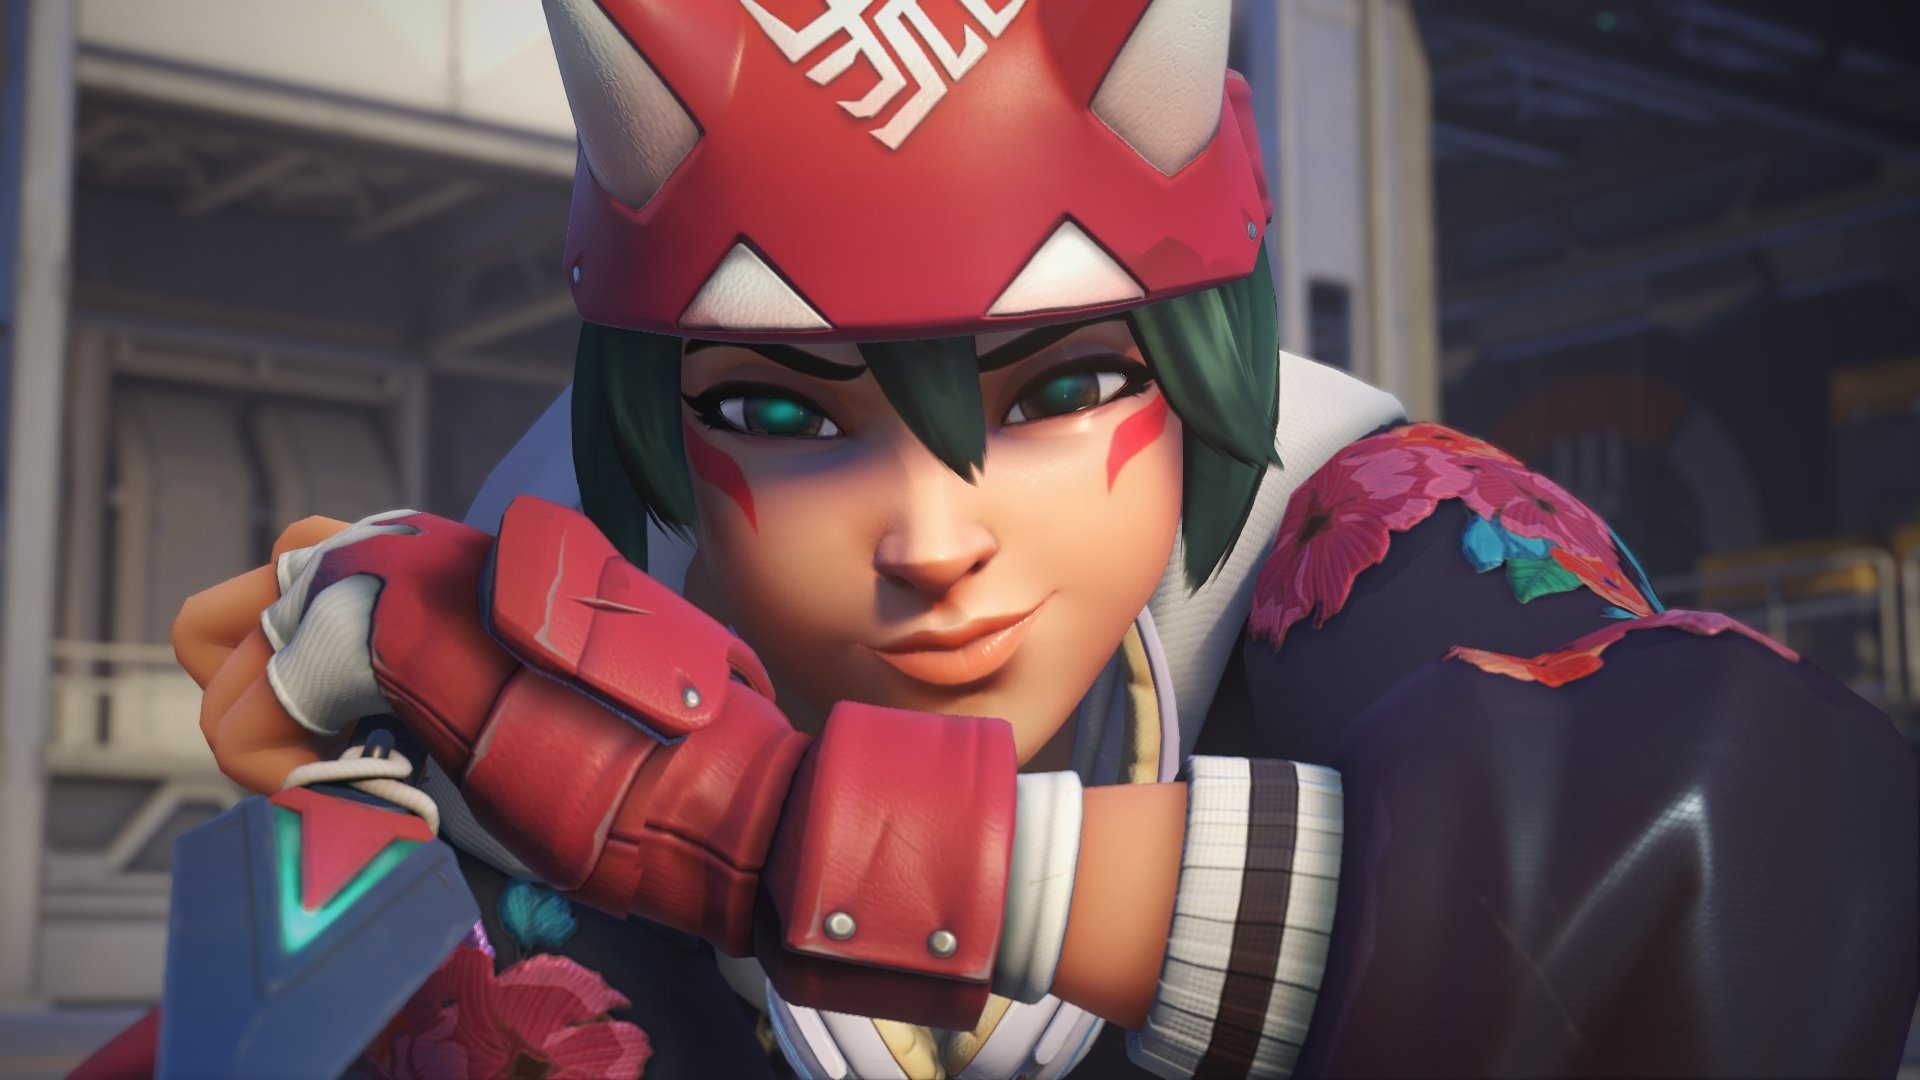 Dot Esports, the song that plays during Kiriko's main menu takeover in Overwatch 2 is a certified banger